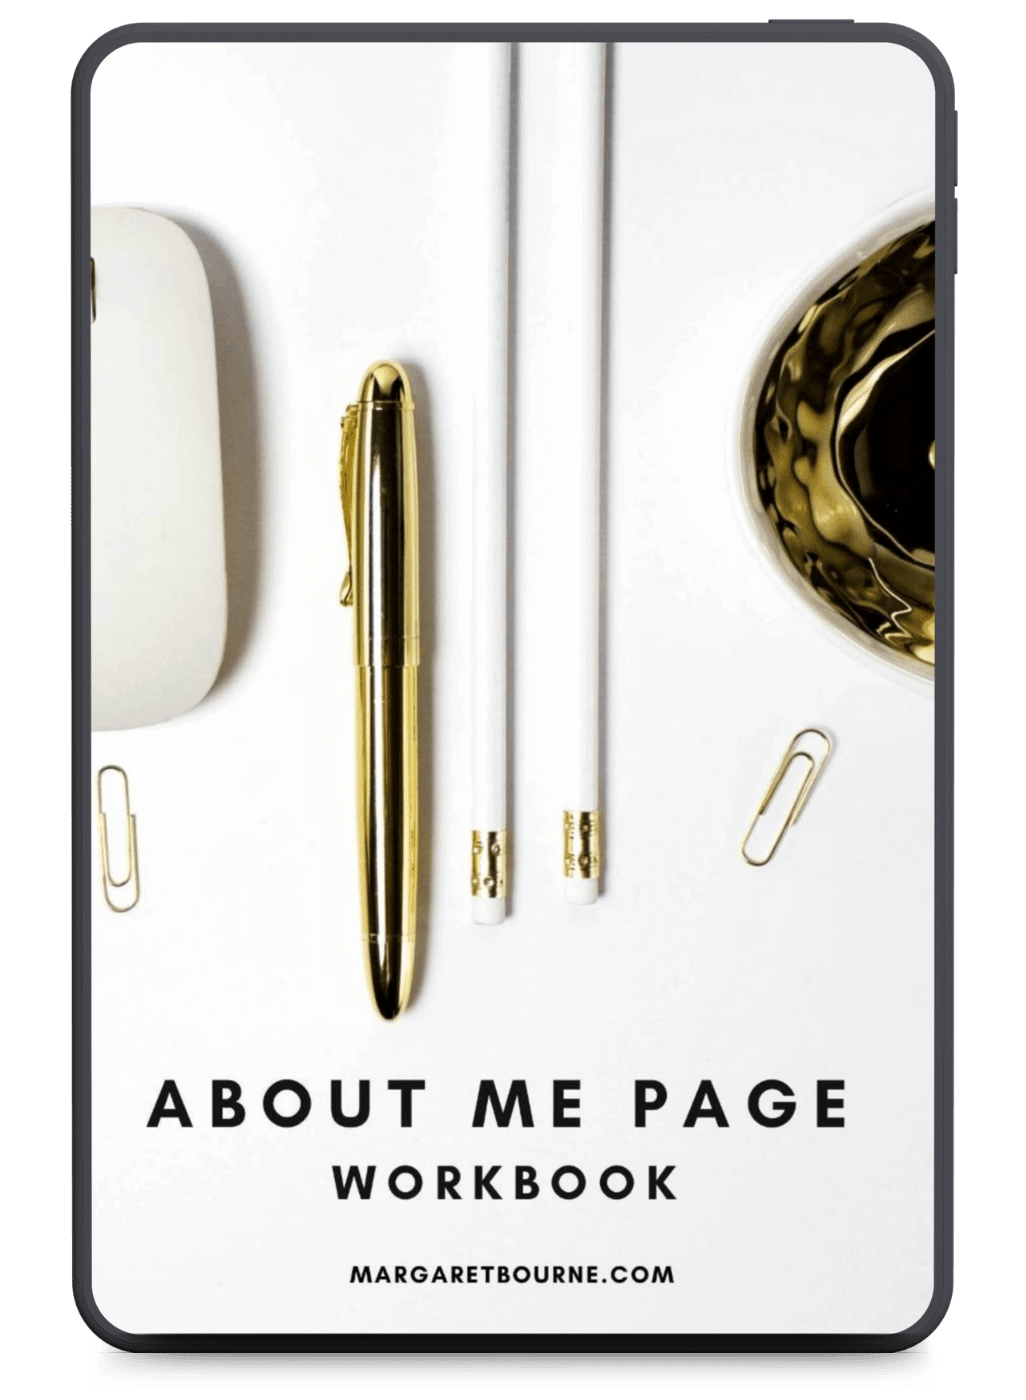 About Me page workbook.